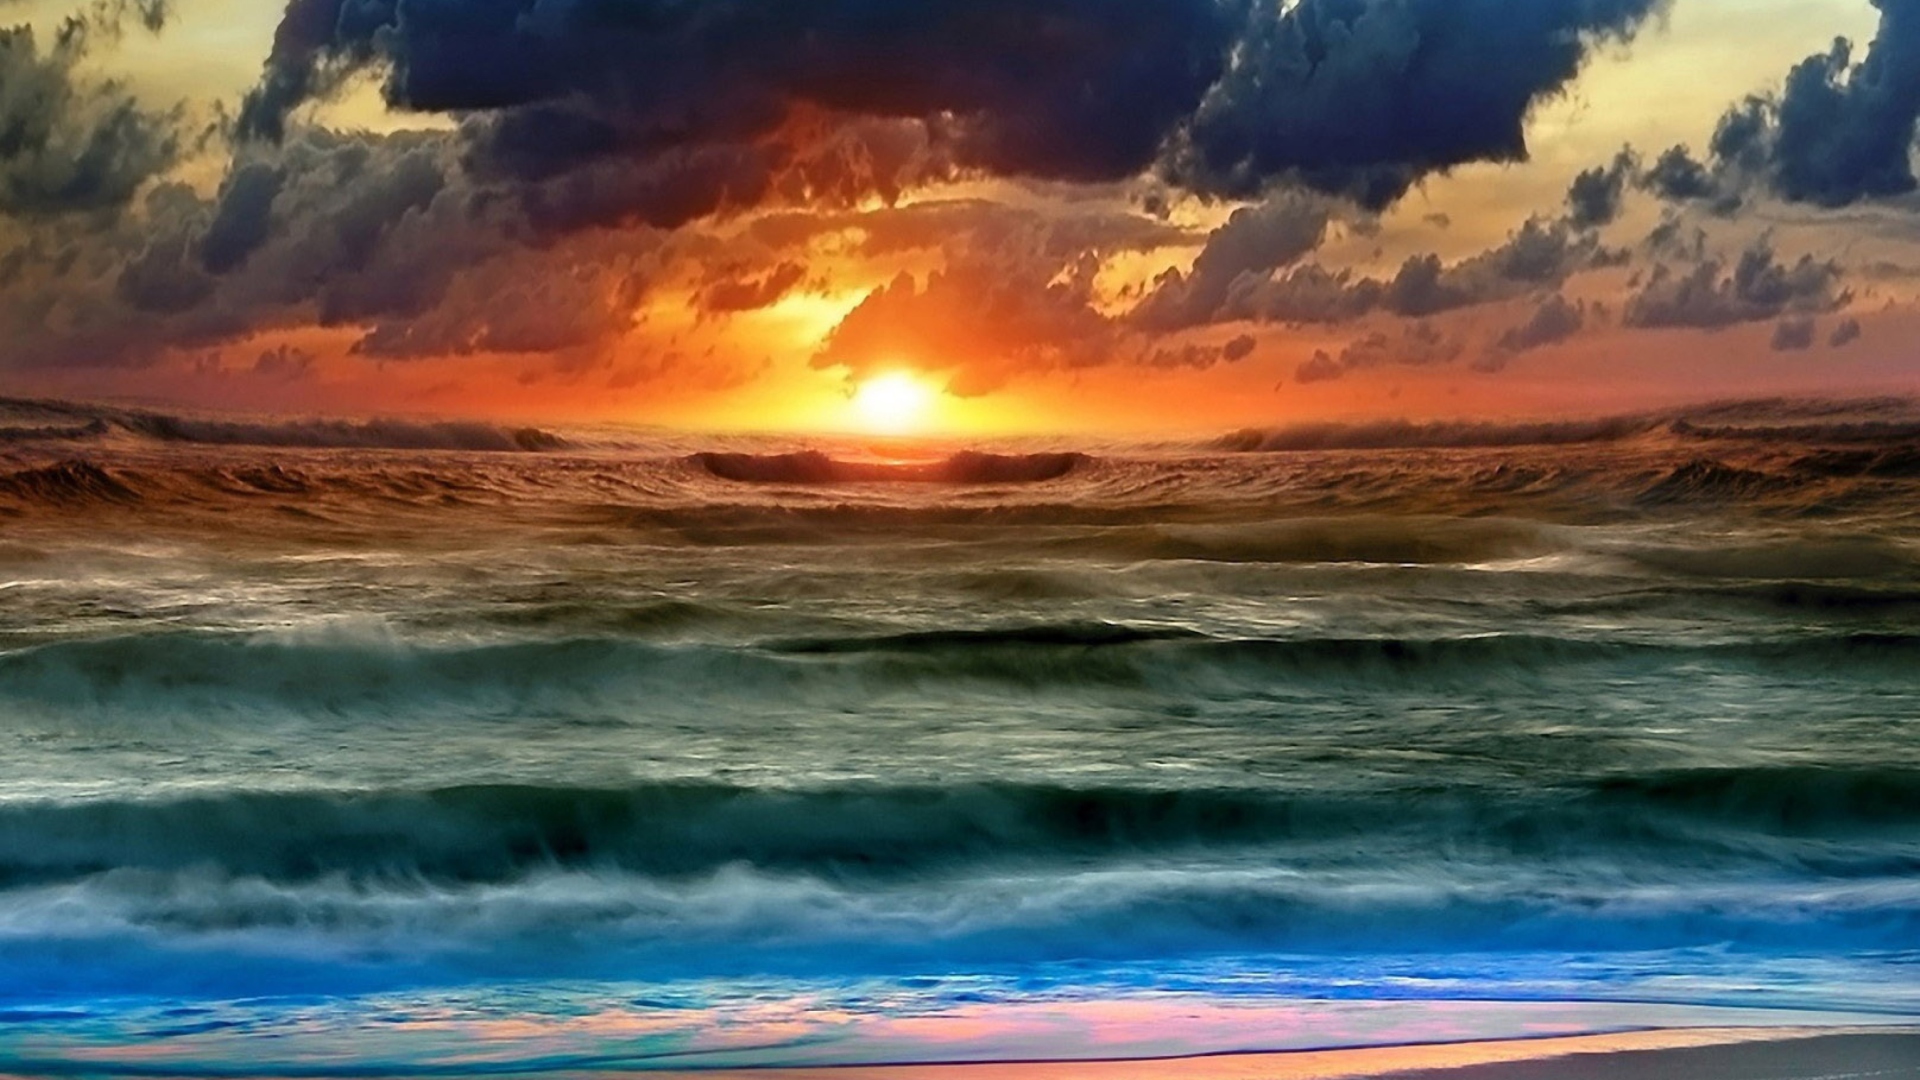 Colorful Sunset And Waves wallpaper 1920x1080